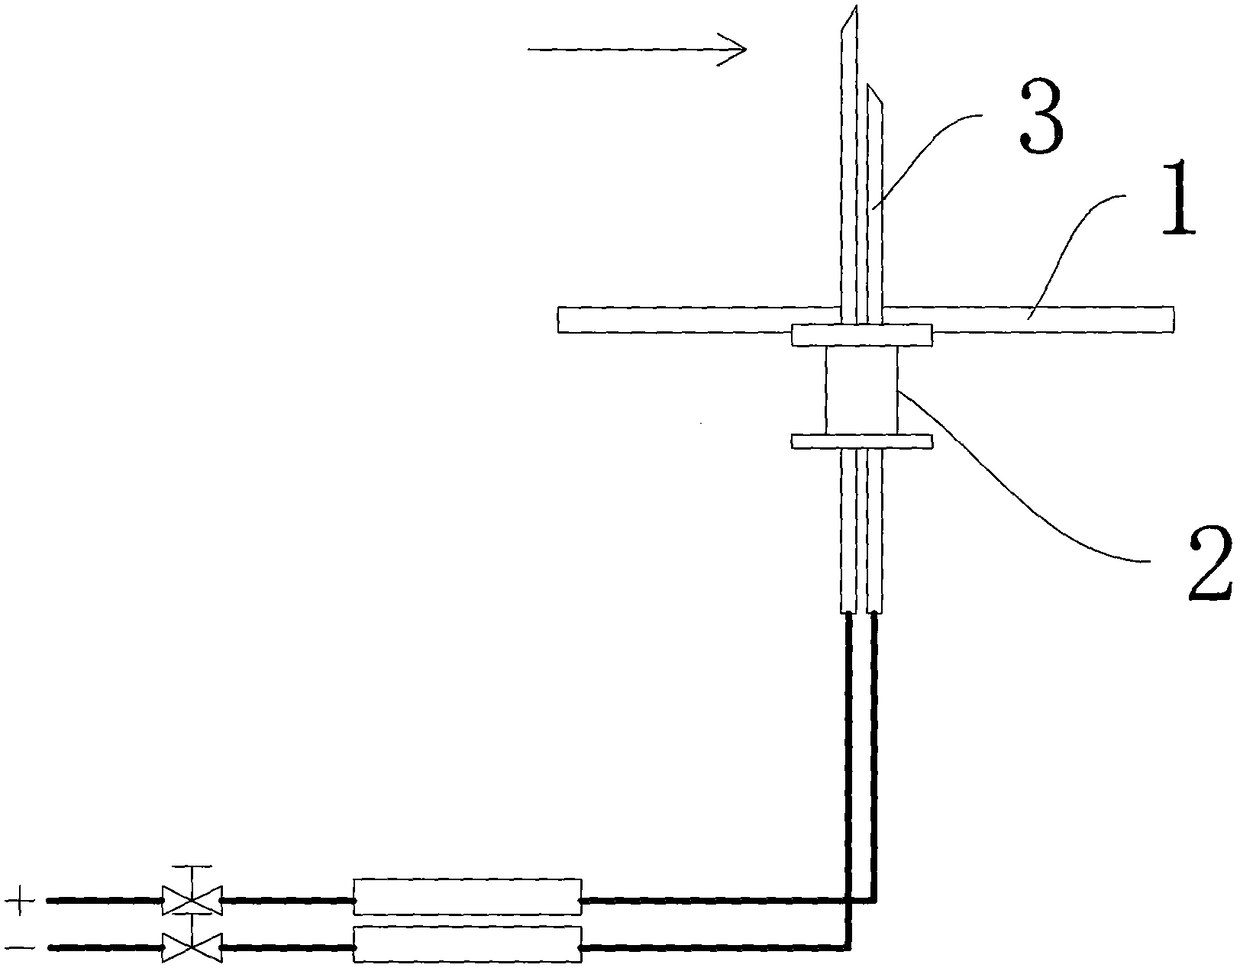 A differential pressure wind speed transmitter